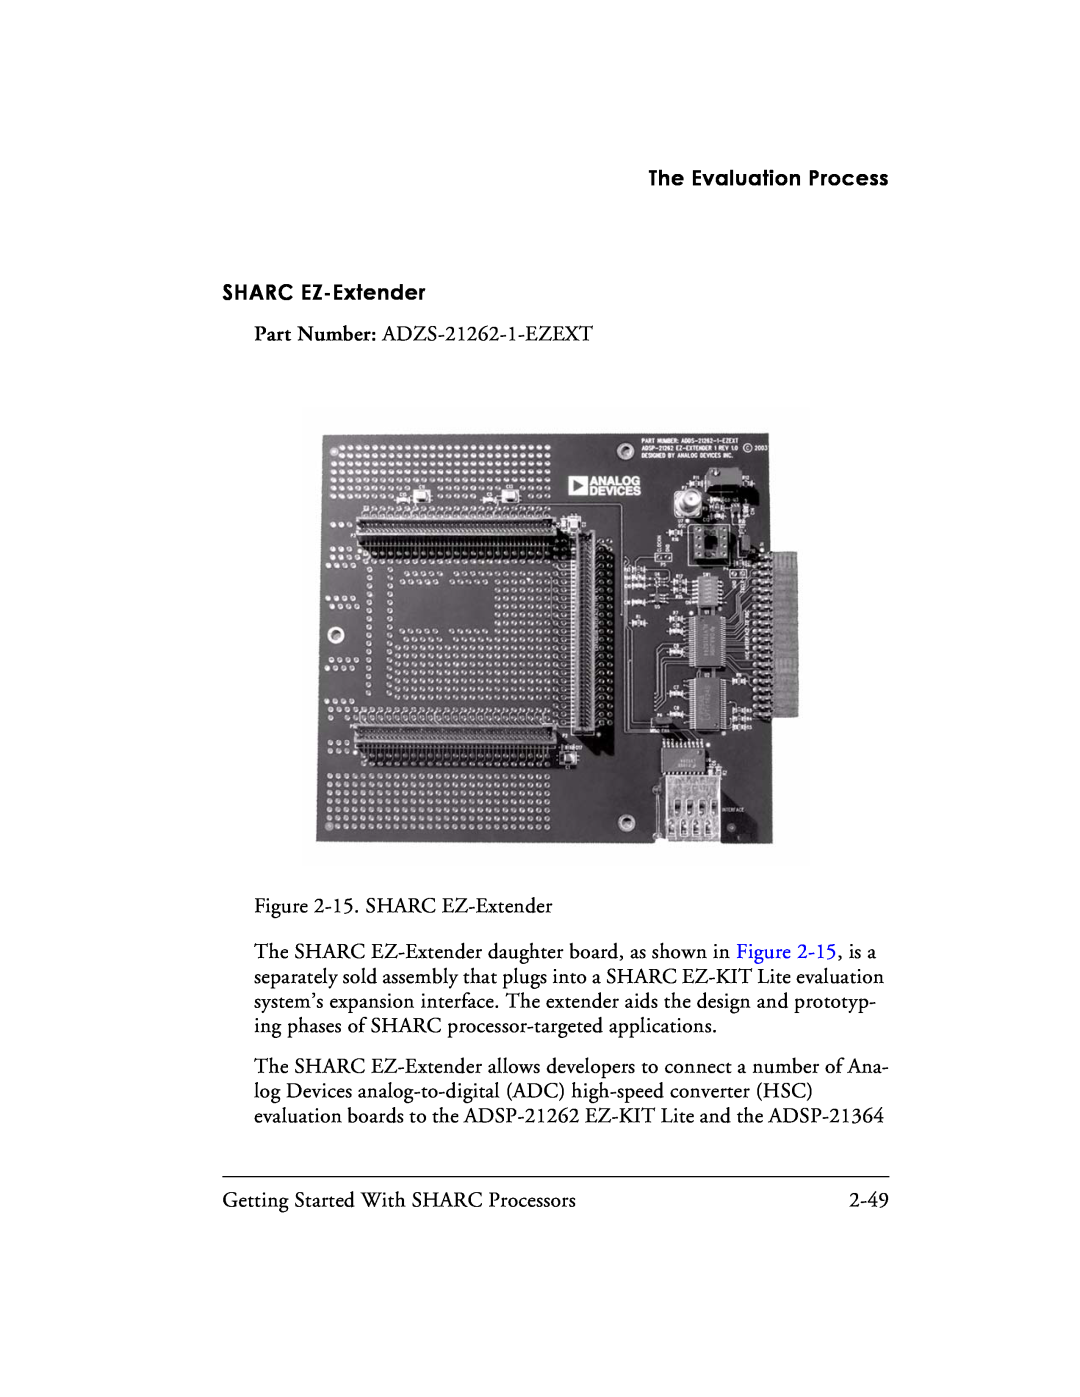 Analog Devices 82-003536-01 manual The Evaluation Process SHARC EZ-Extender 